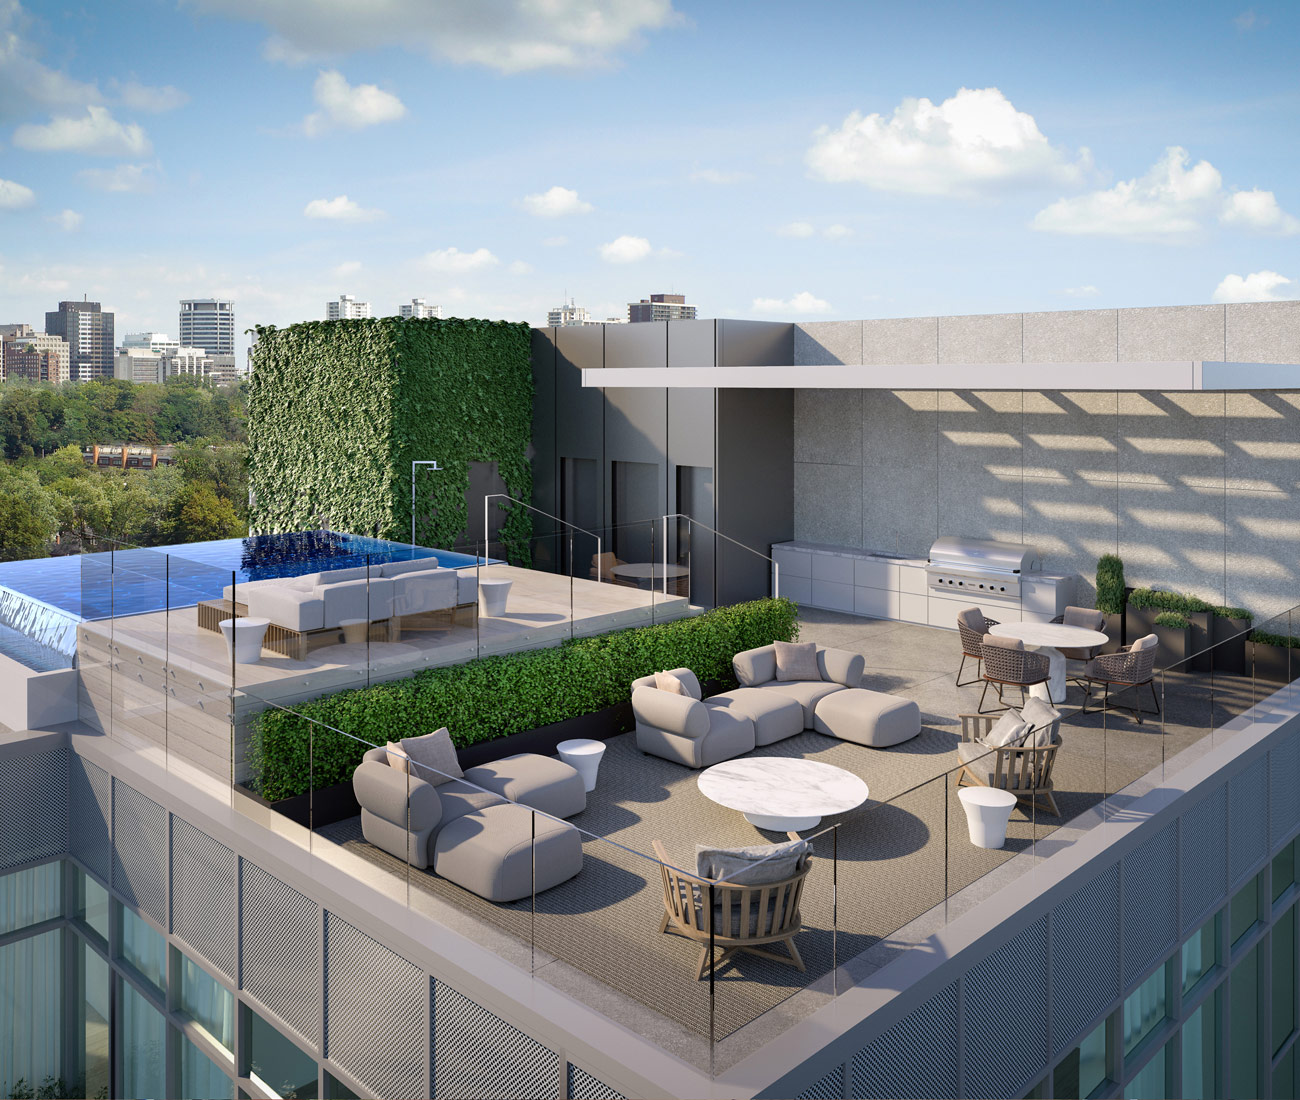 Condo Terrace rendering with furniture. Freed Development